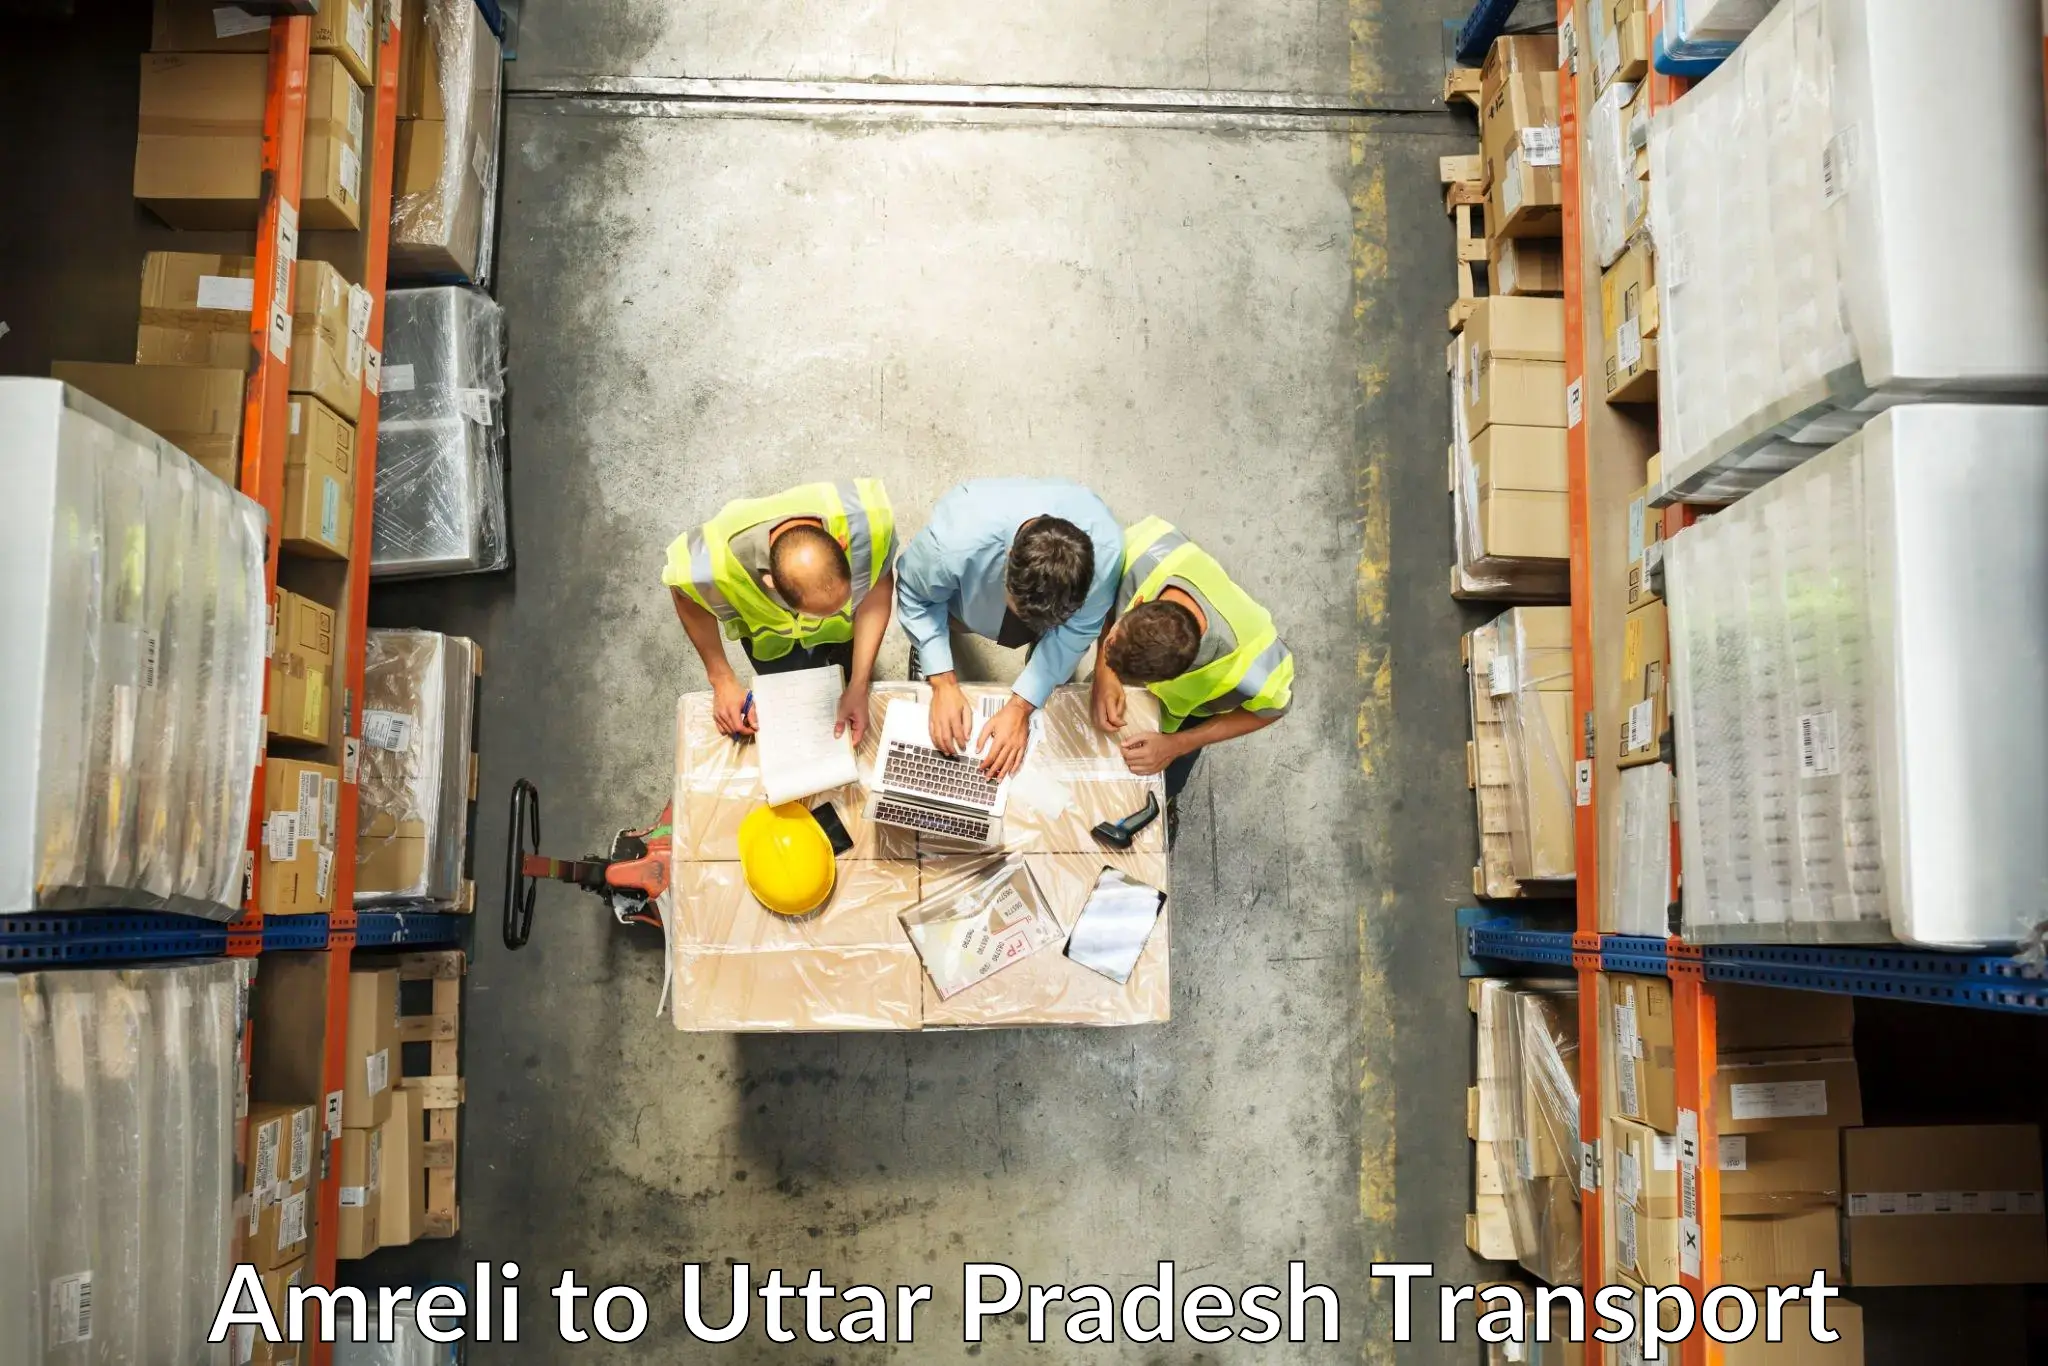 Part load transport service in India Amreli to Amethi